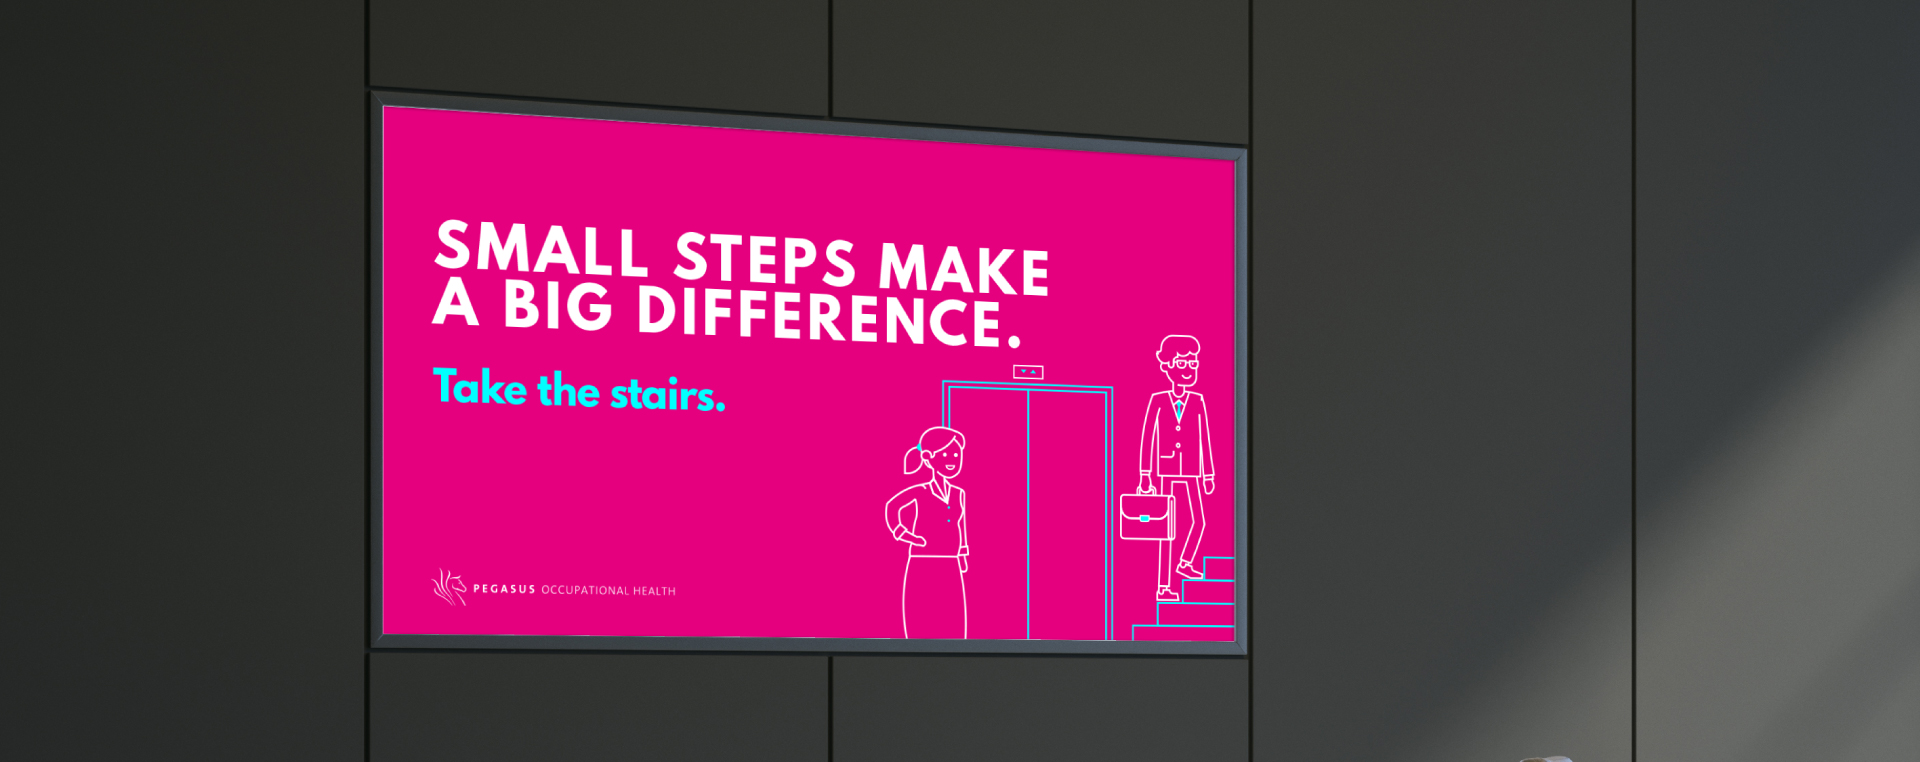 A bright digital display suggesting employees use the stairs rather than waiting for an elevator.